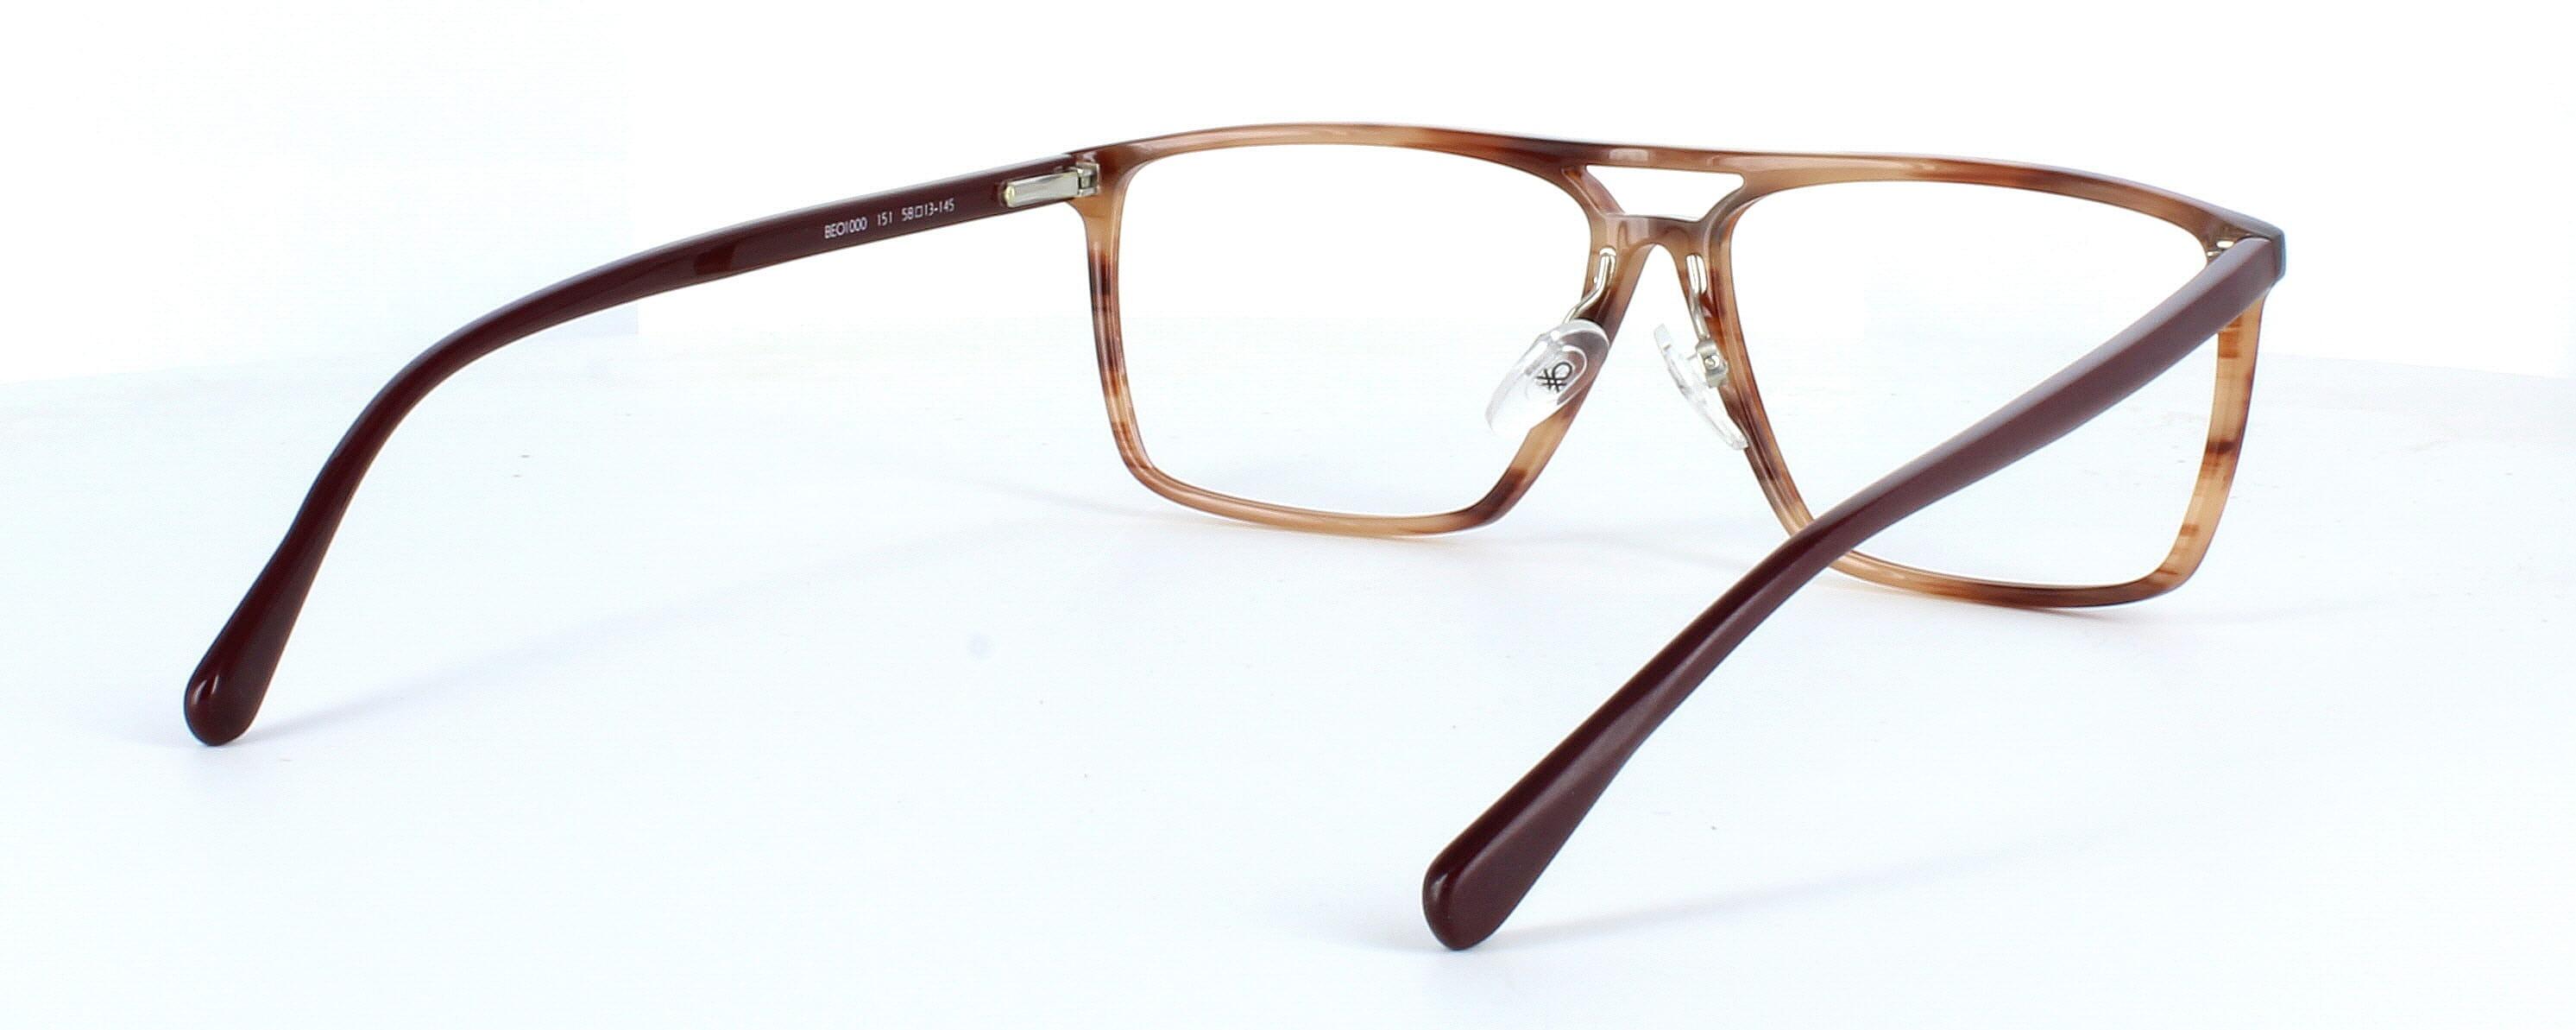 Benetton BE1O000 151 - Gents designer hand made acetate frame with tortoise face and brown arms - image view 4